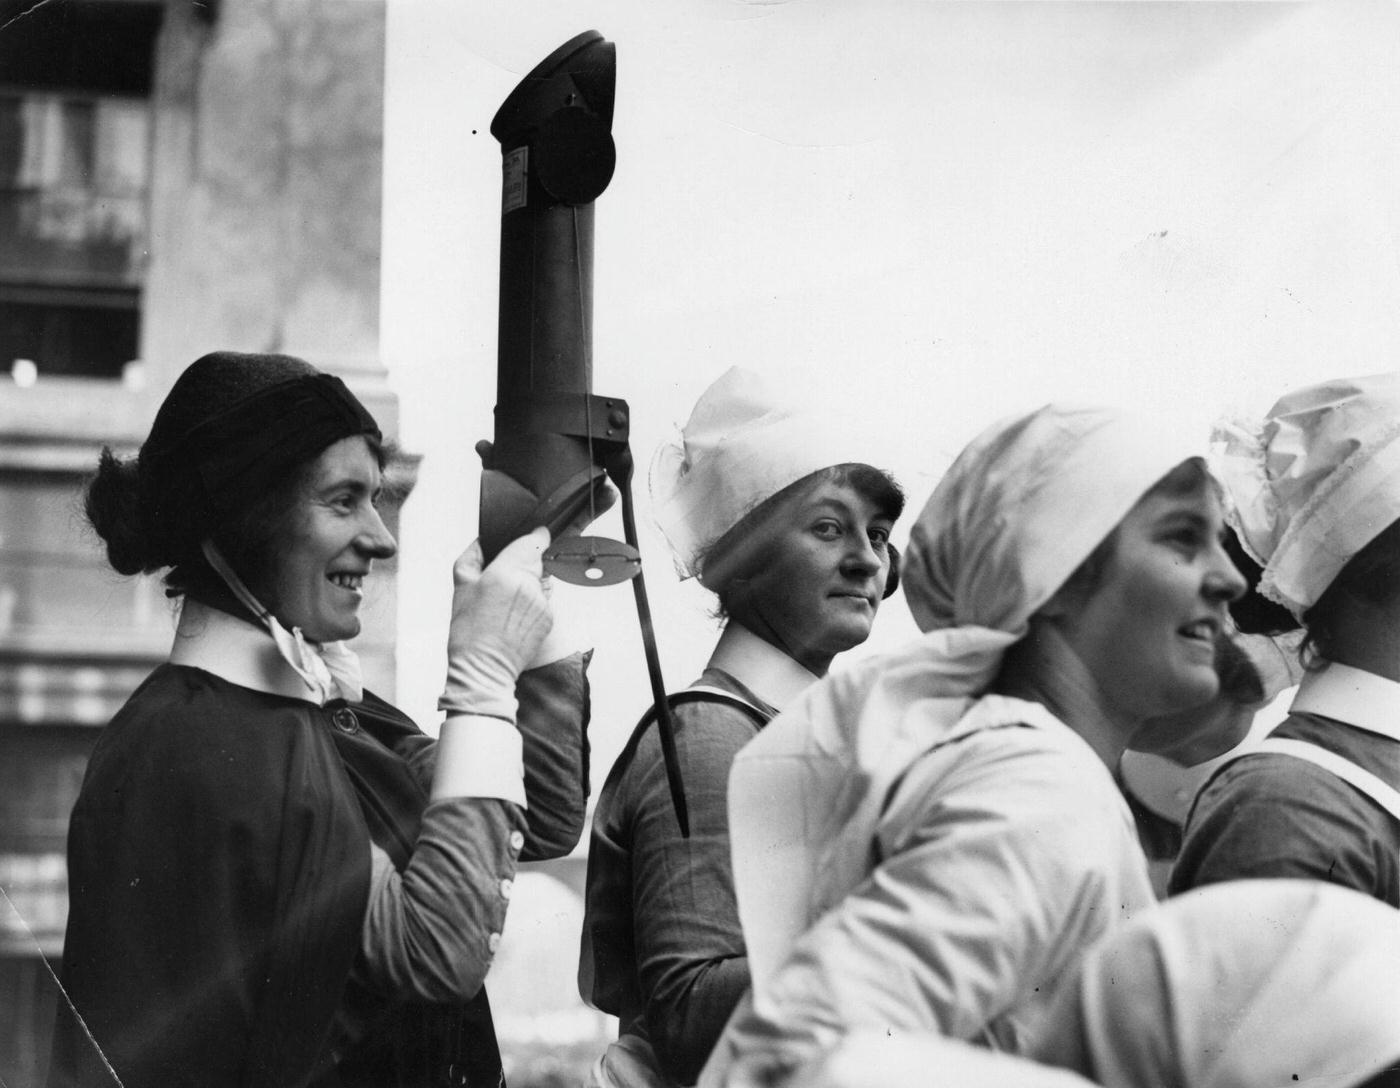 A nurse at St George's Hospital watching the procession at the wedding of George VI to Lady Elizabeth Bowes-Lyon, through a periscope.